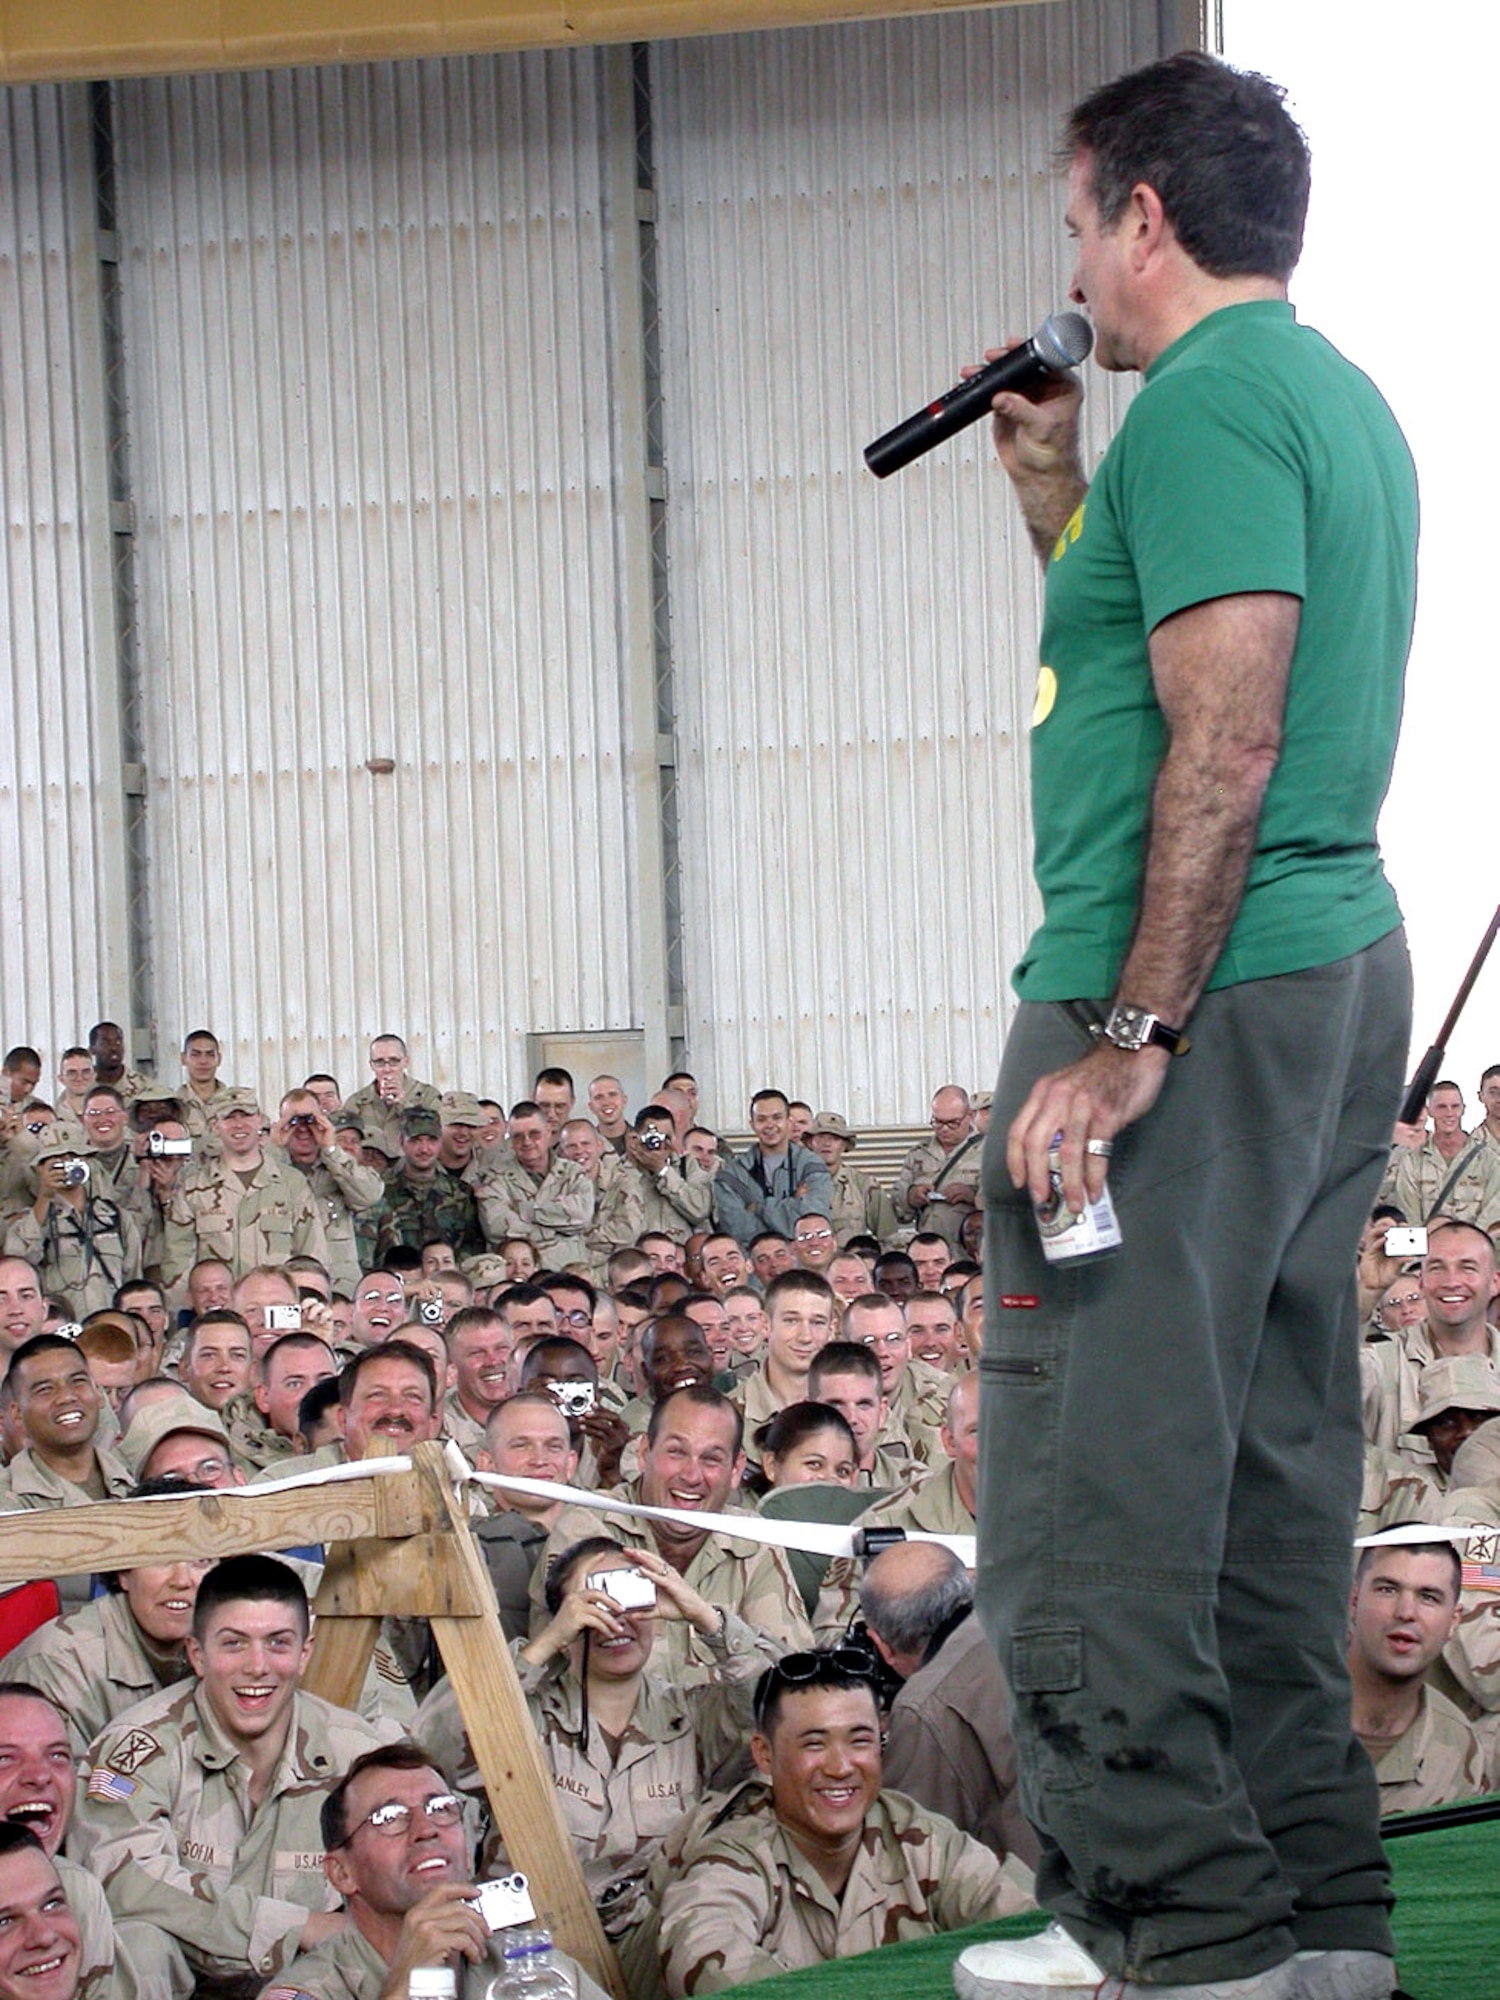 BALAD AIR BASE, Iraq -- Academy Award-winning actor and comedian Robin Williams performs for more than 300 airmen and soldiers deployed here Dec. 18.  Also with him were Olympic gold medalist and professional wrestler Kurt Angle, NASCAR driver Mike Wallace and former model and television personality Leeann Tweeden.  (U.S. Air Force photo by Staff Sgt. A.C. Eggman)